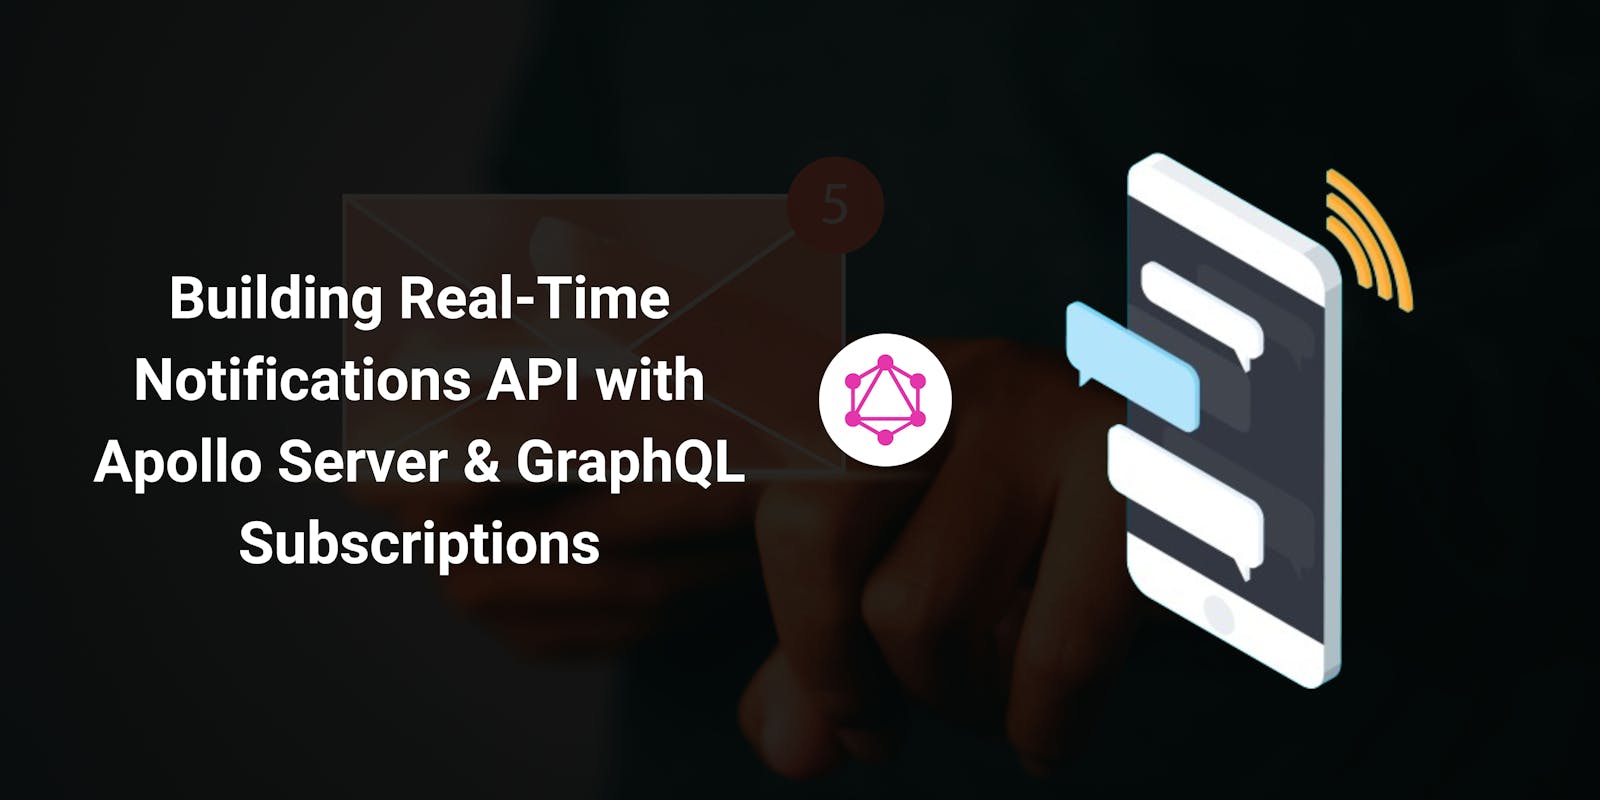 Build Real-time notification API with Apollo Server and GraphQL subscriptions